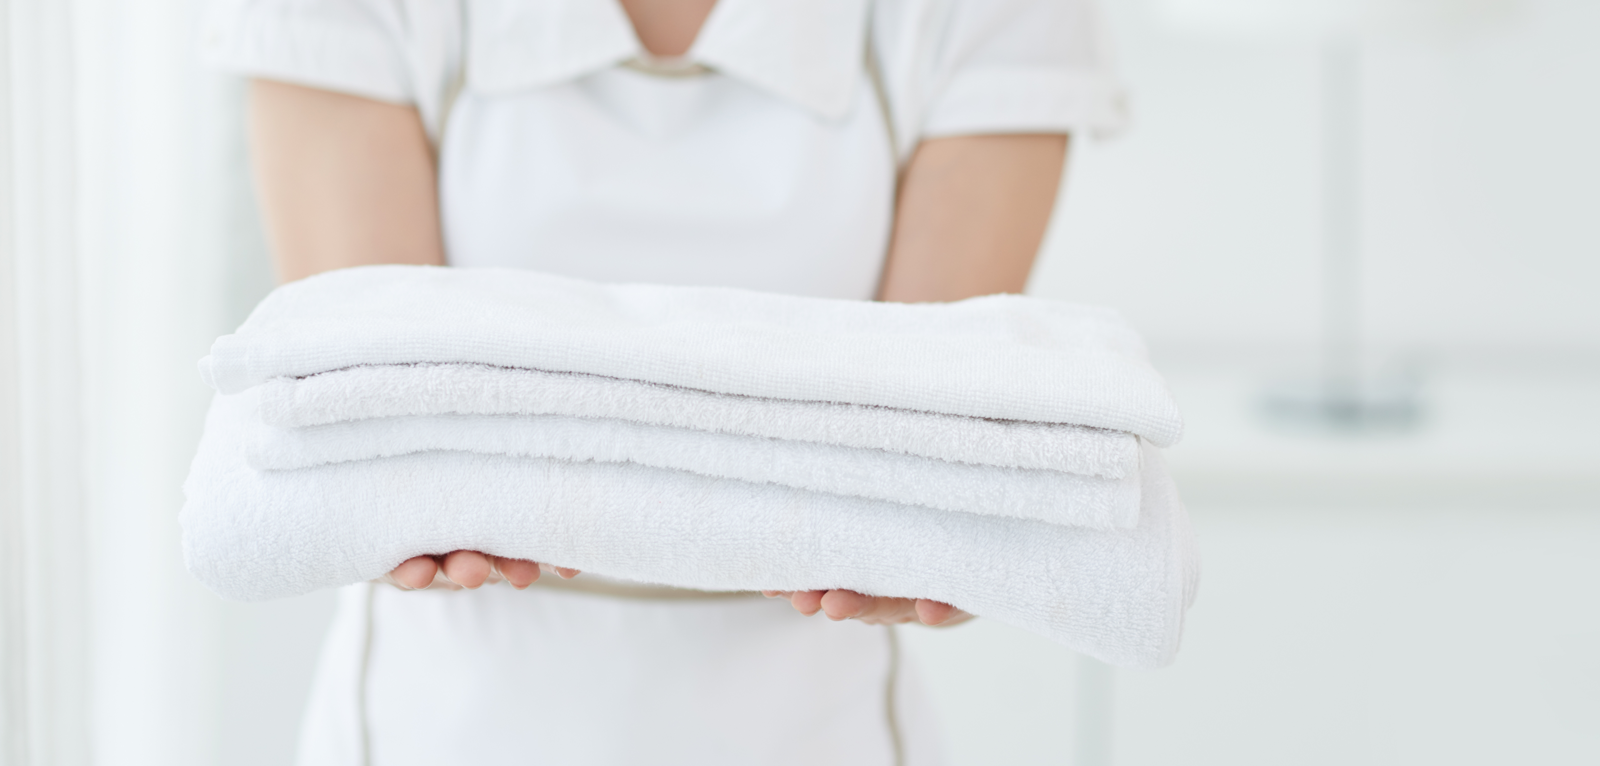 How To Select The Perfect Commercial Laundry Service?